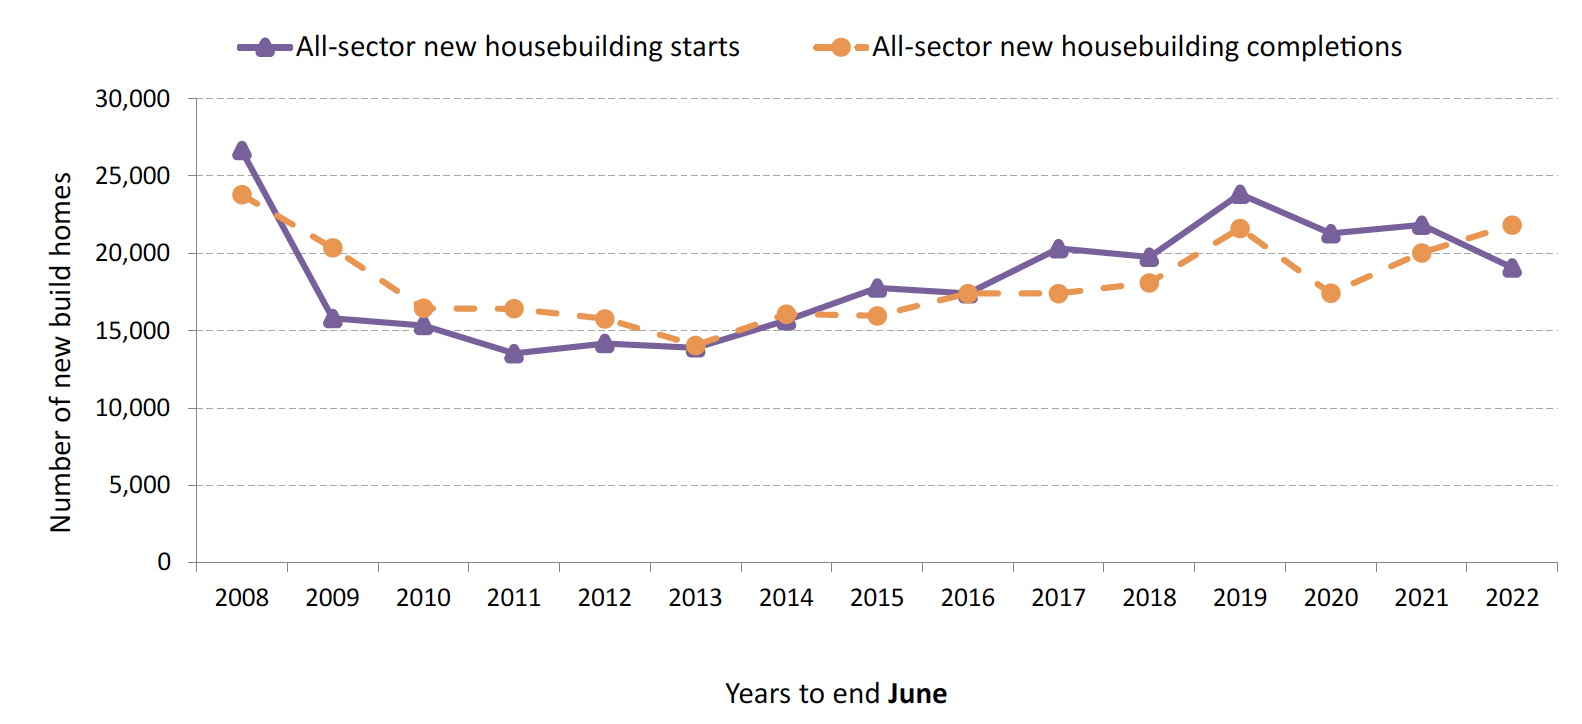 Chart 1: A line chart showing both All-sector new housebuilding starts and All-sector new housebuilding completions, with Starts decreasing and Completions increasing in the latest year to end June.